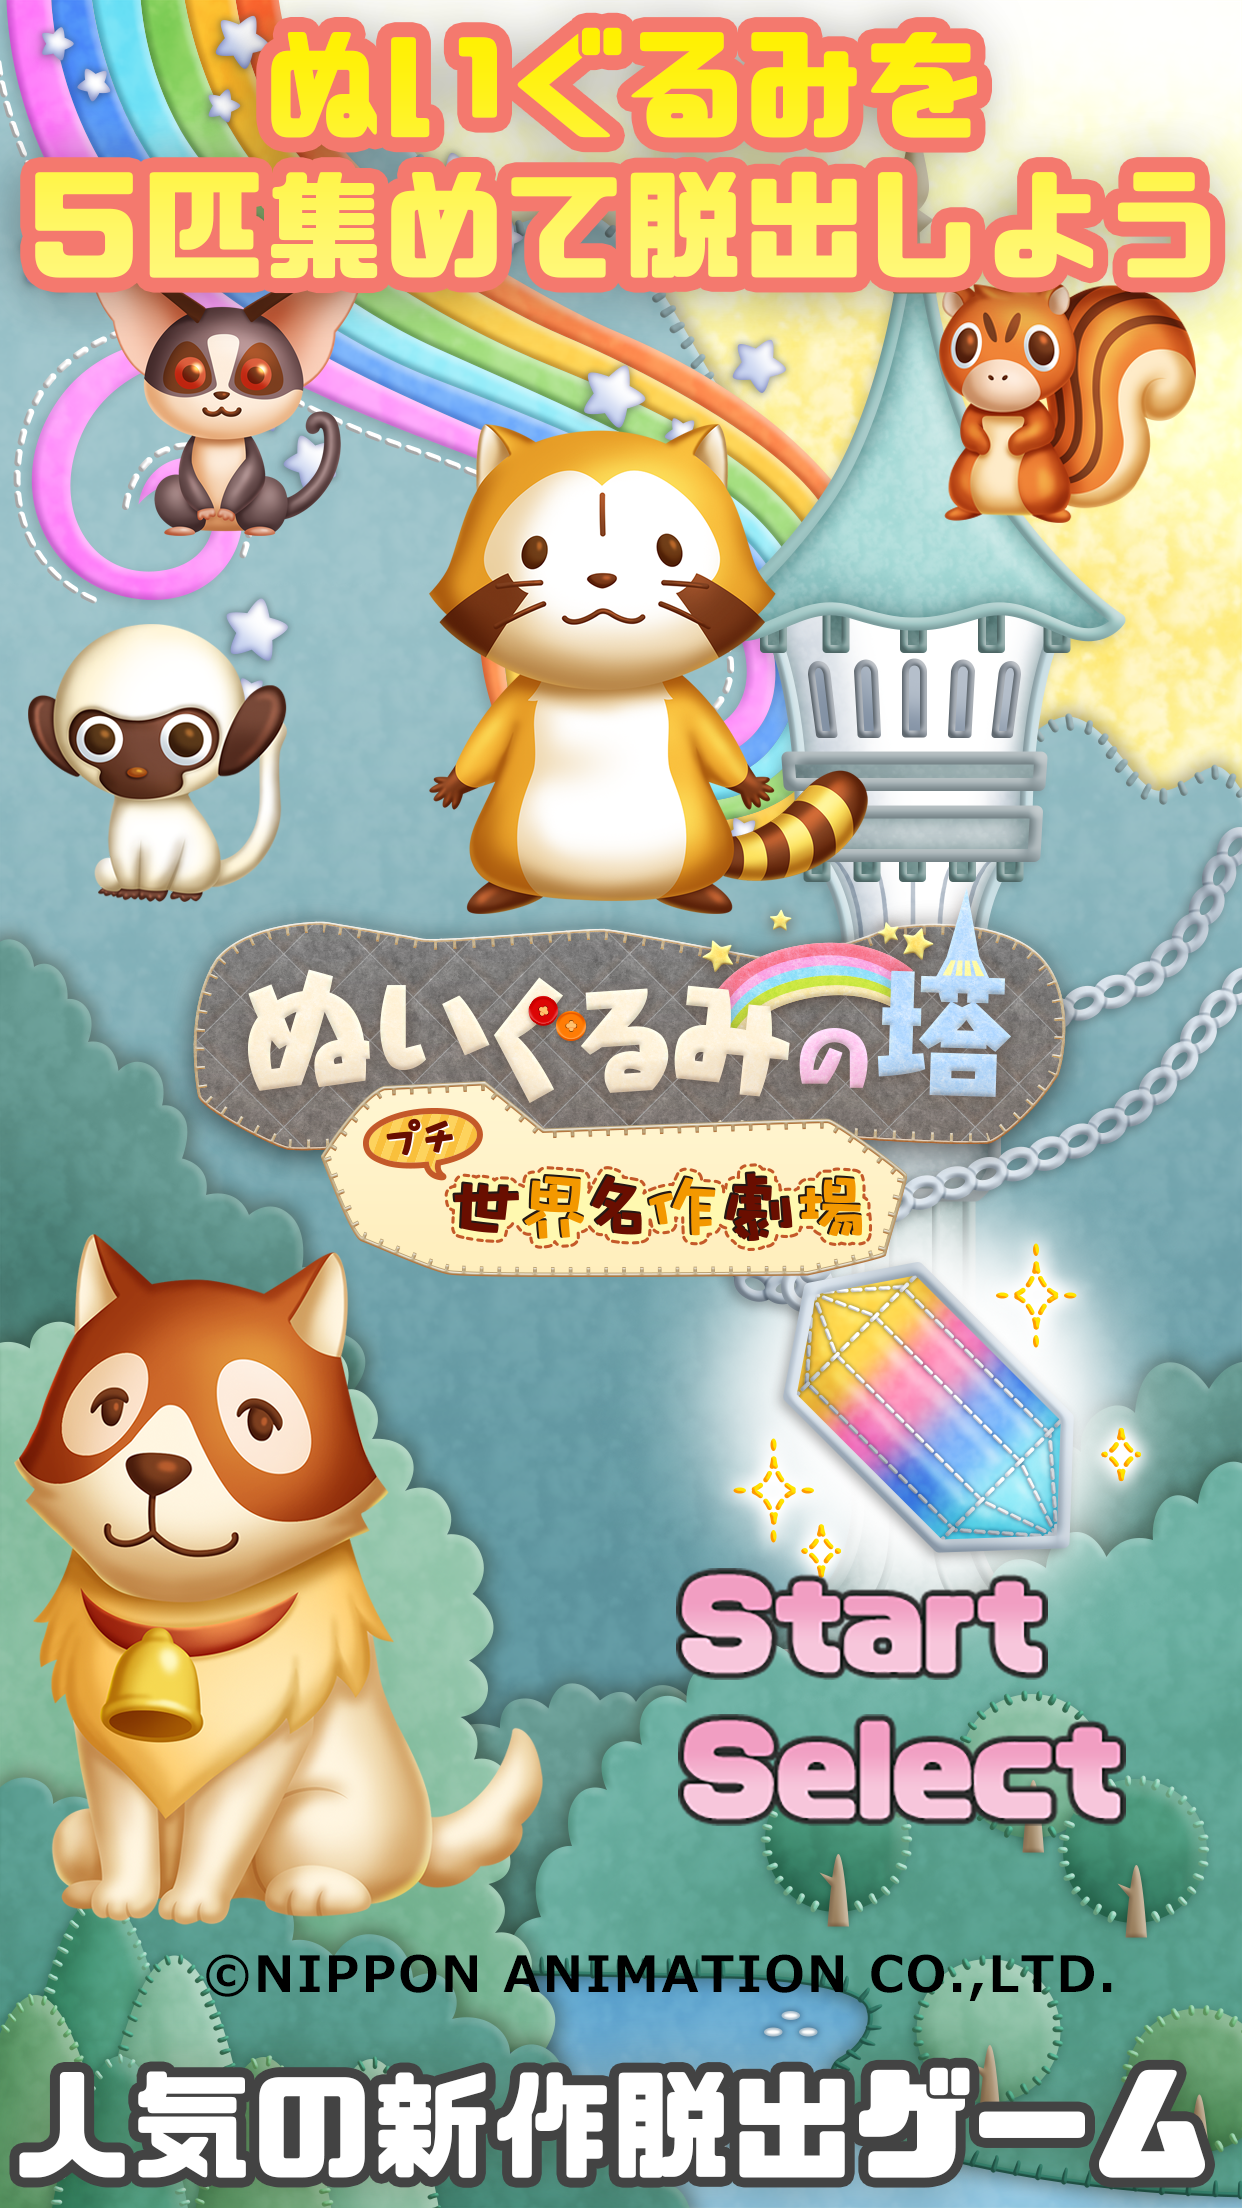 Screenshot 1 of Escape Game-Stuffed Toy Tower Petit World Masterpiece Theatre Edition- 1.0